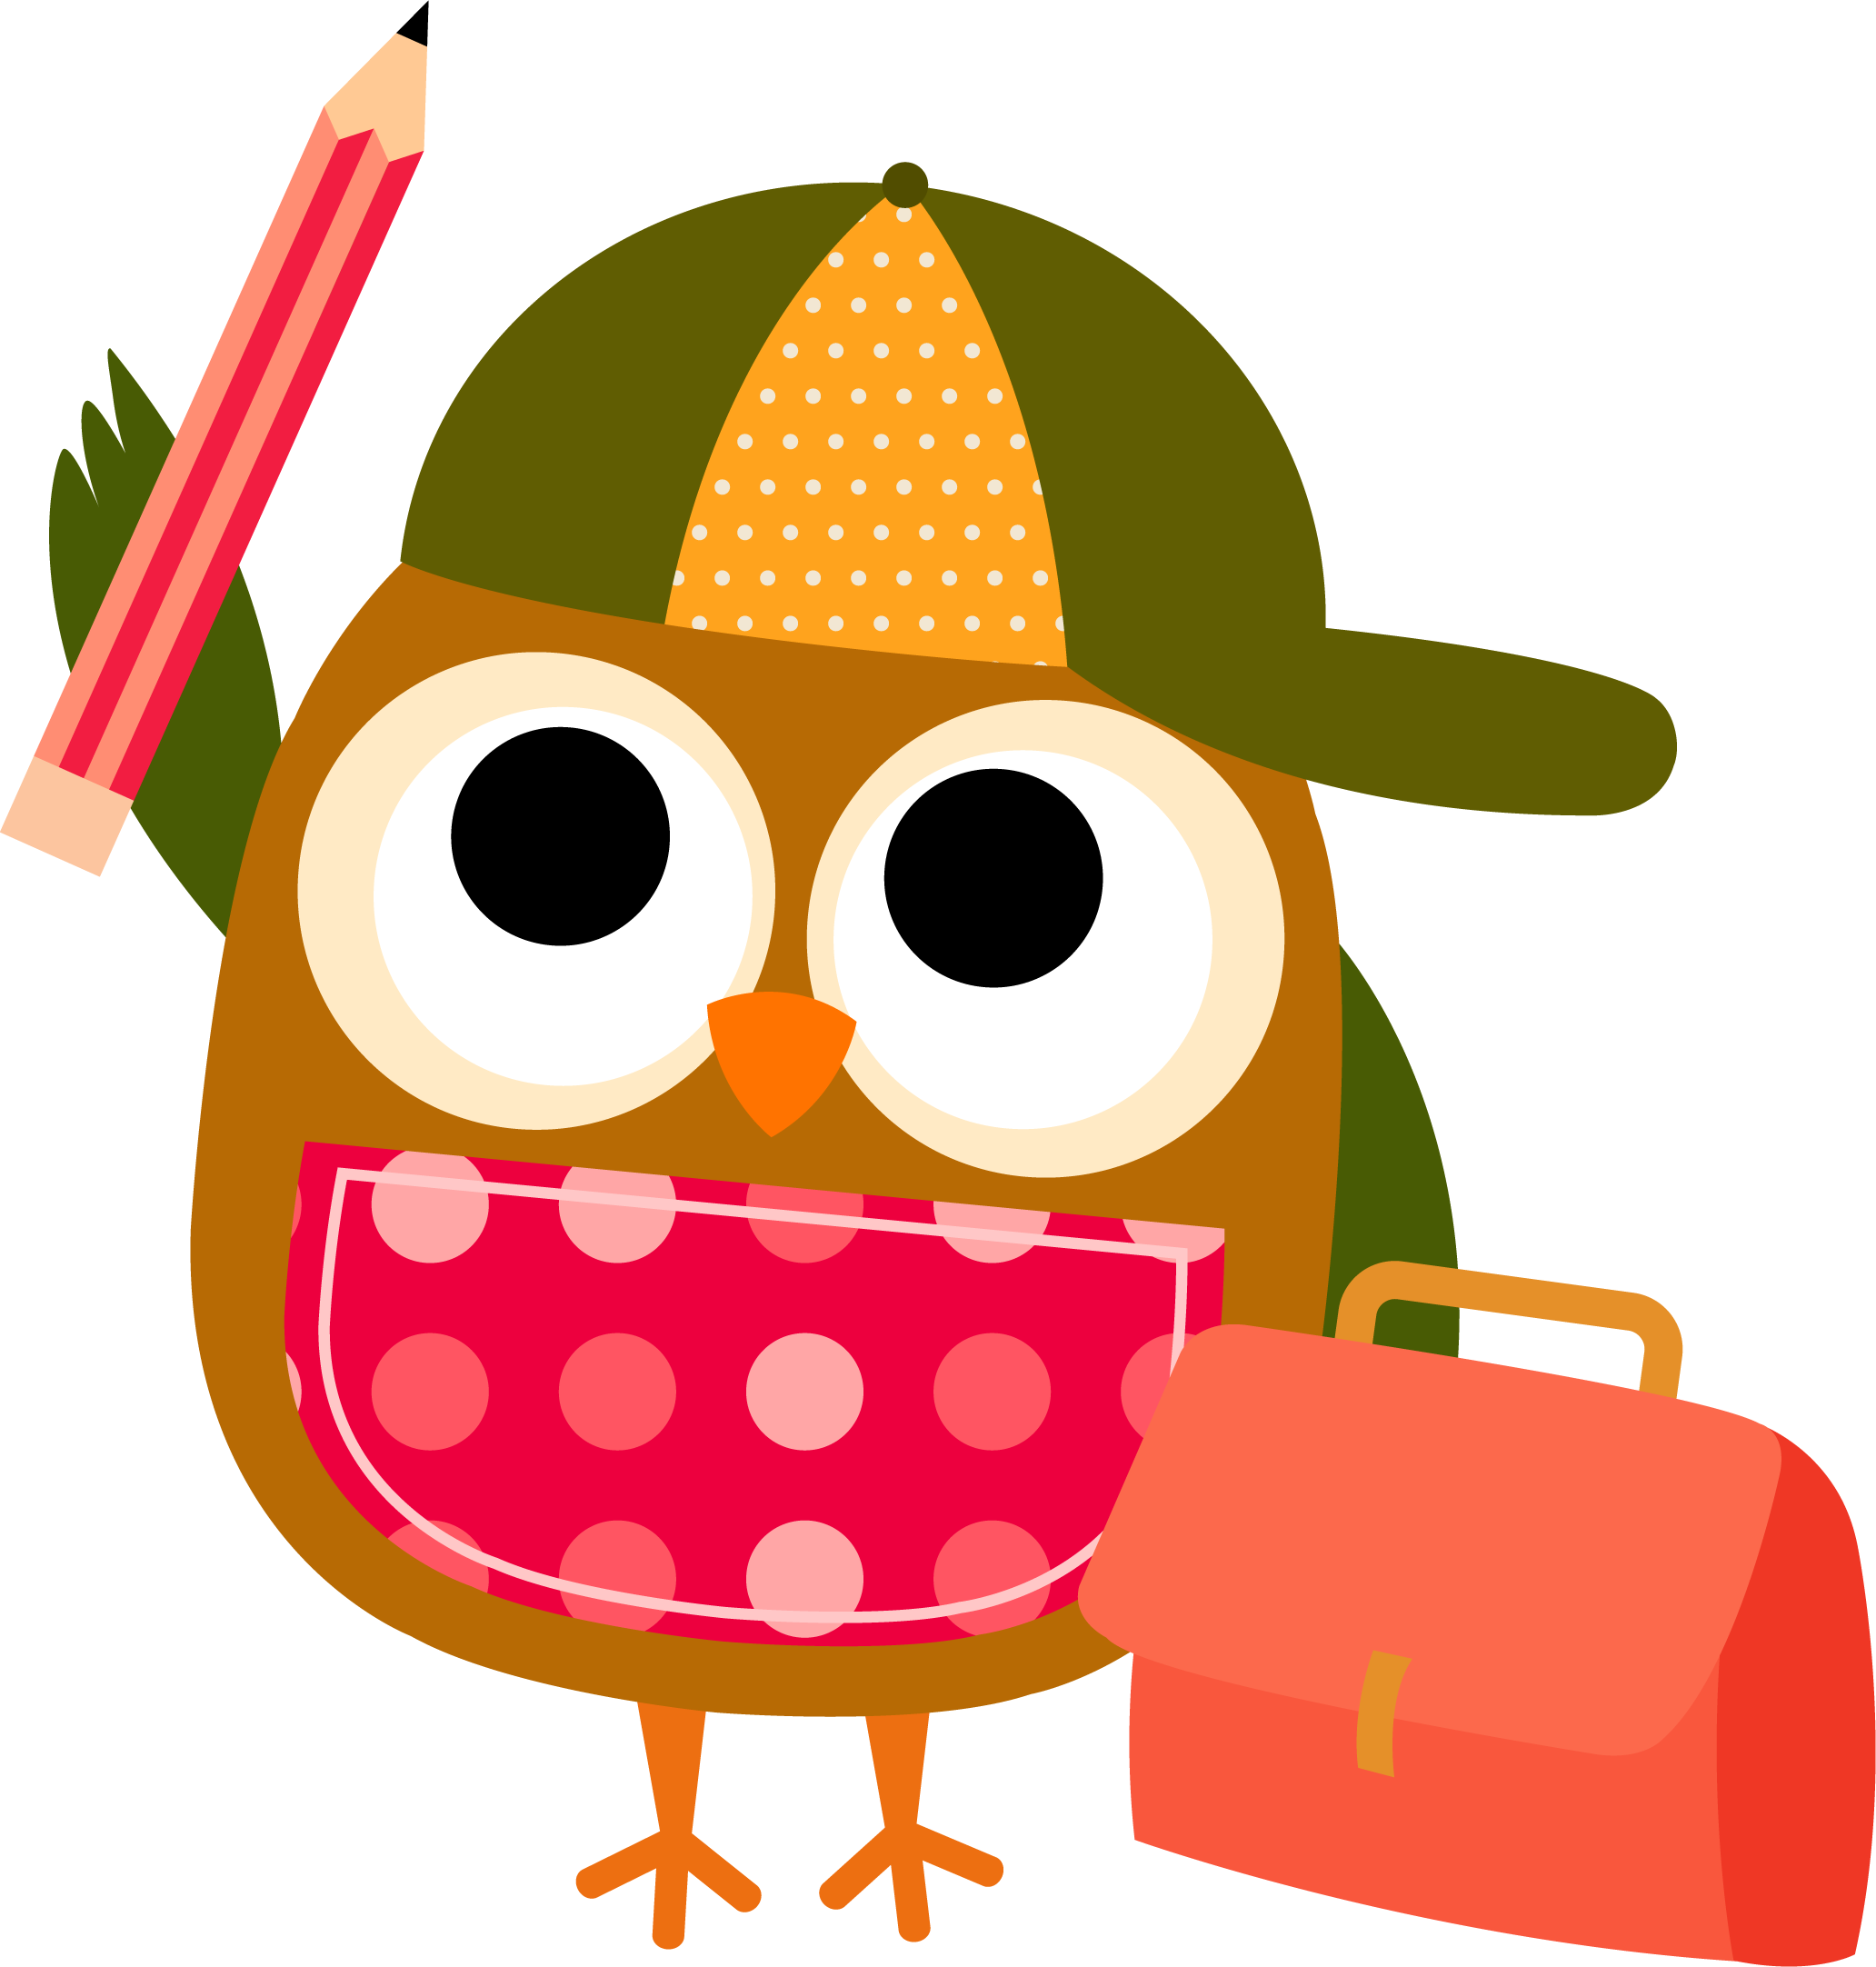 Wise Owl Clipart - Cliparts.co